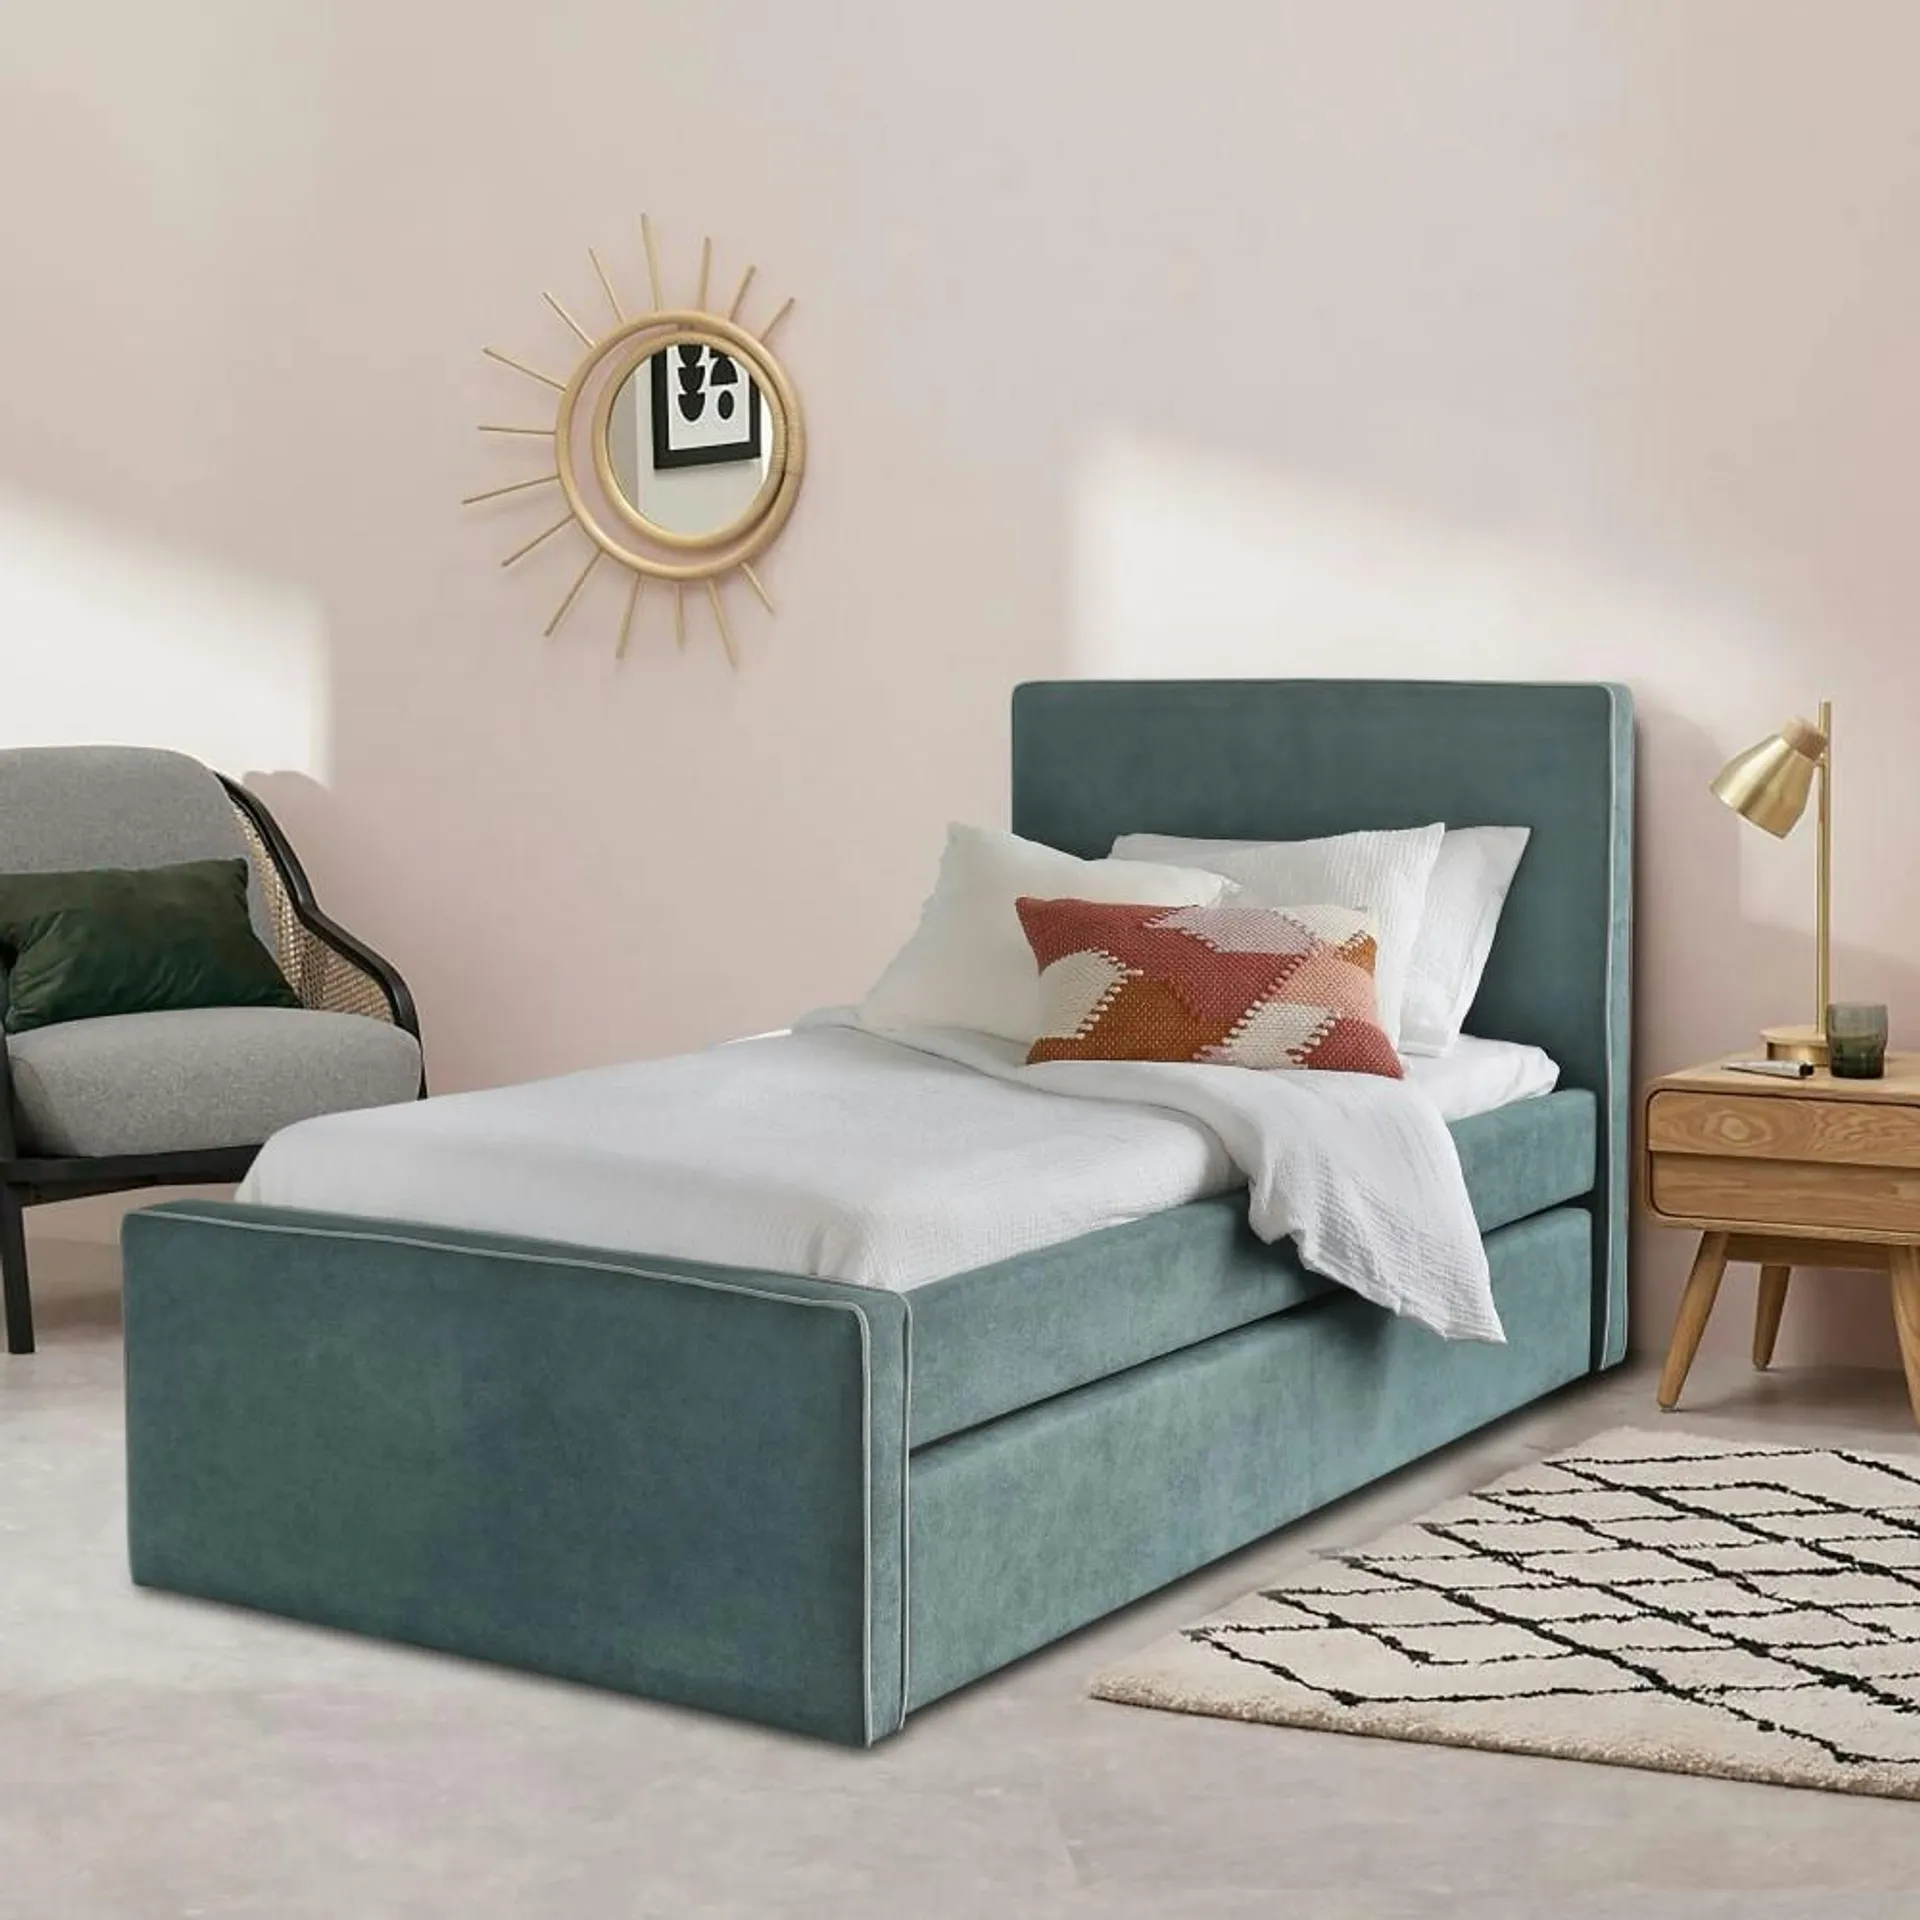 Coco Single Bed Frame With Trundle, Teal